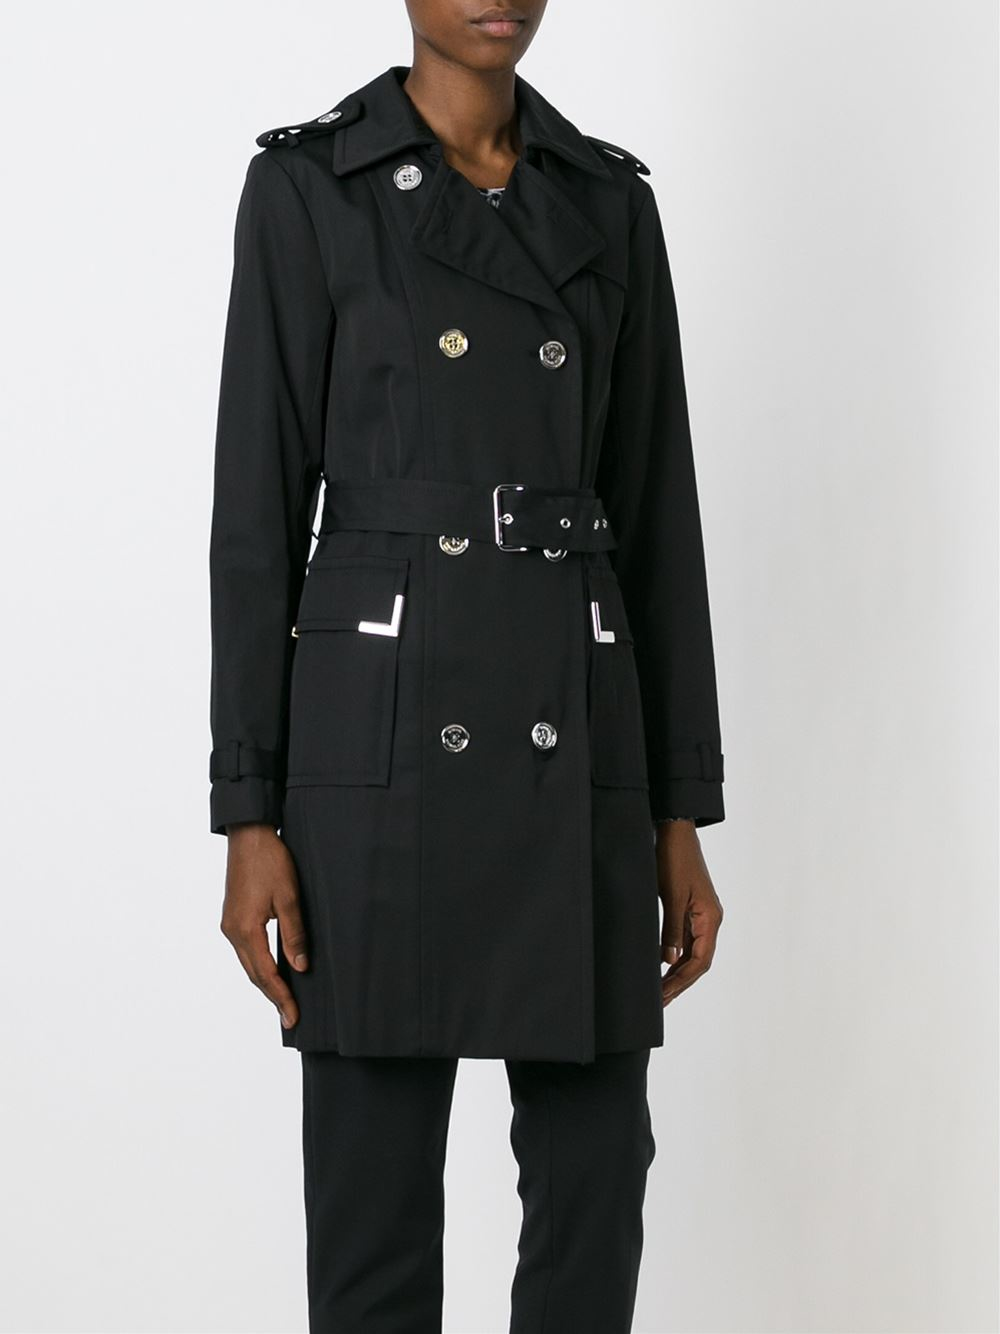 MICHAEL Michael Kors Belted Trench Coat in Black - Lyst